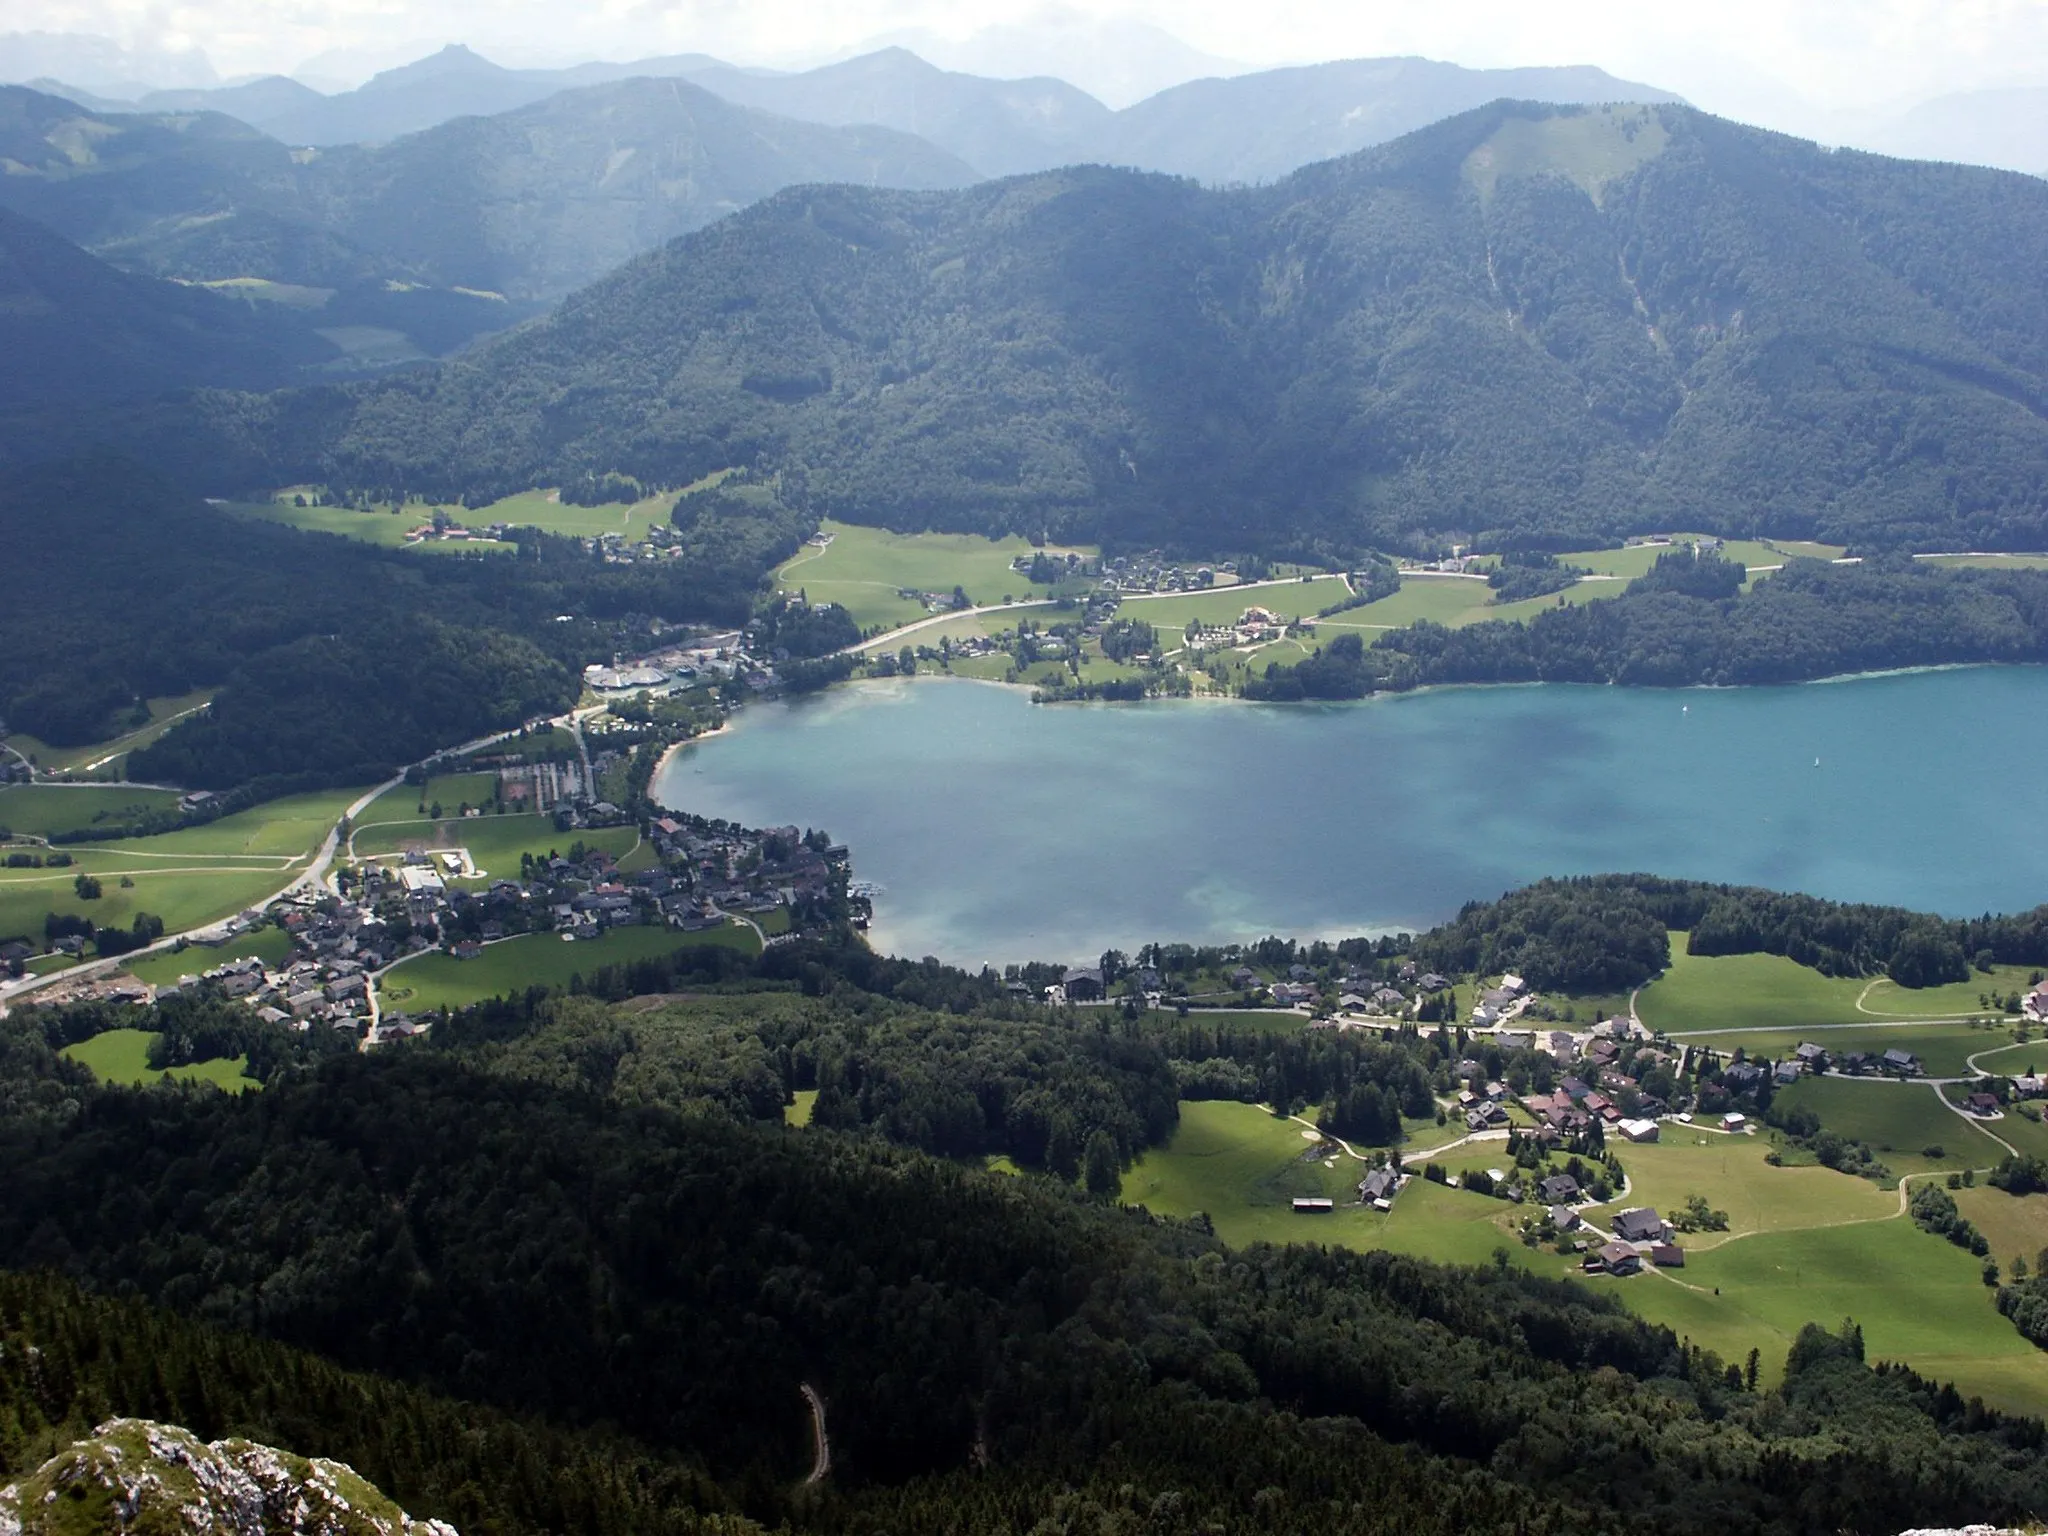 Photo showing: The village "Fuschl am See" in Salzburg/Austria and the lake Fuschlsee as seen from the mountain Schober (Frauenkopf). Besides the main road you can also see the new headquater of Red Bull which looks like two cones, the old HQ beside it is too small to recognize.
The upper right mountain is the Fibling, 1307 meters
Picture taken 2006-07-03 by myself D.Höss./Birka

licence: GFDL fo shizzle